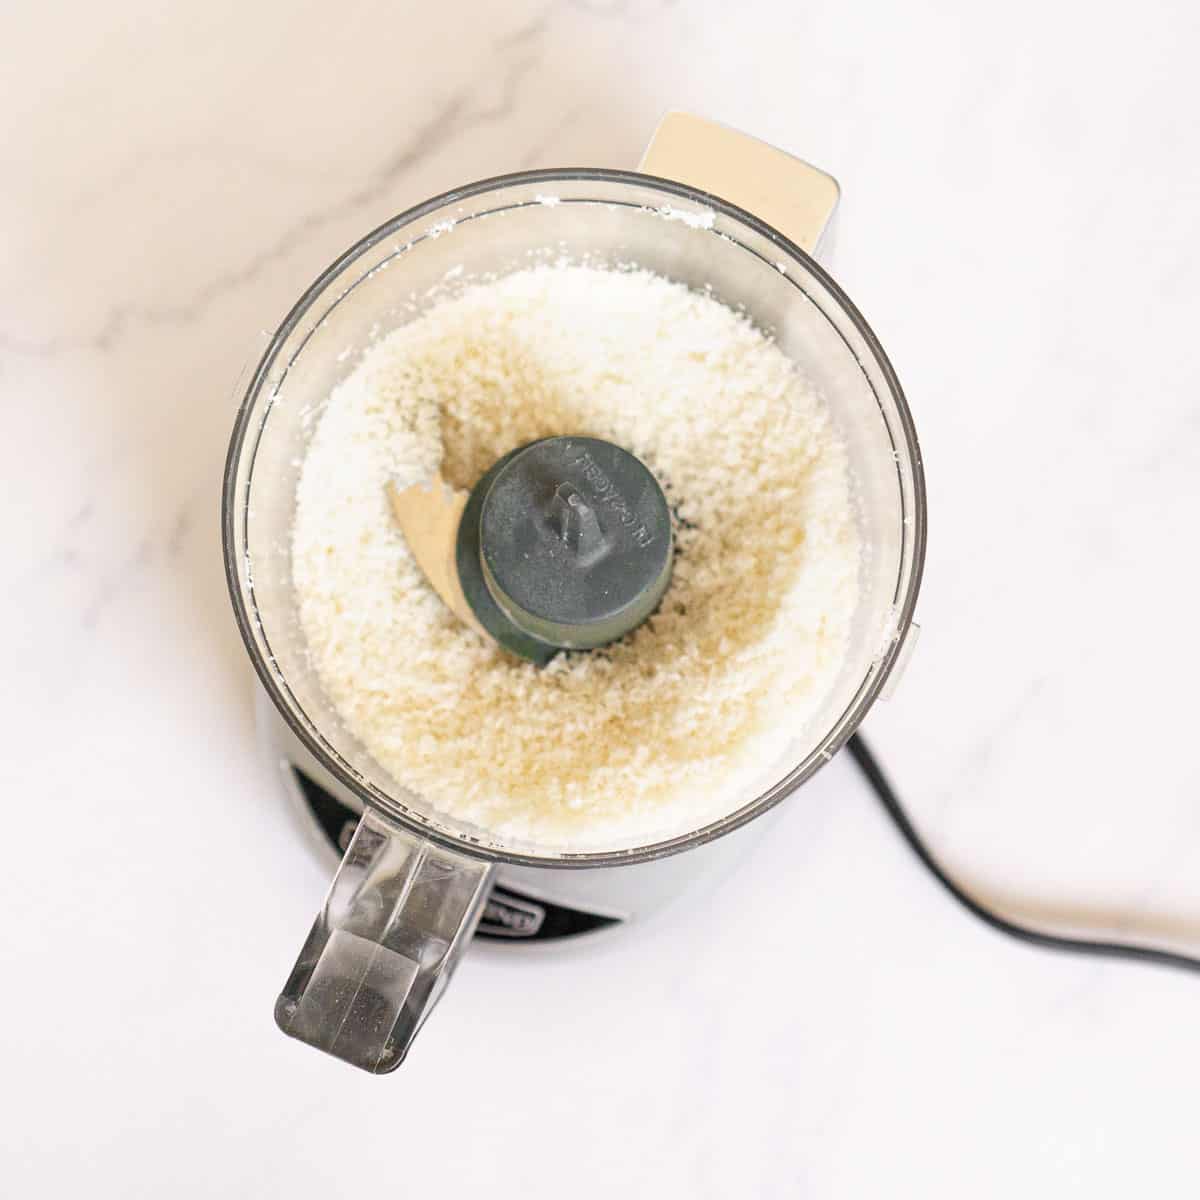 Shredded coconut in a food processor